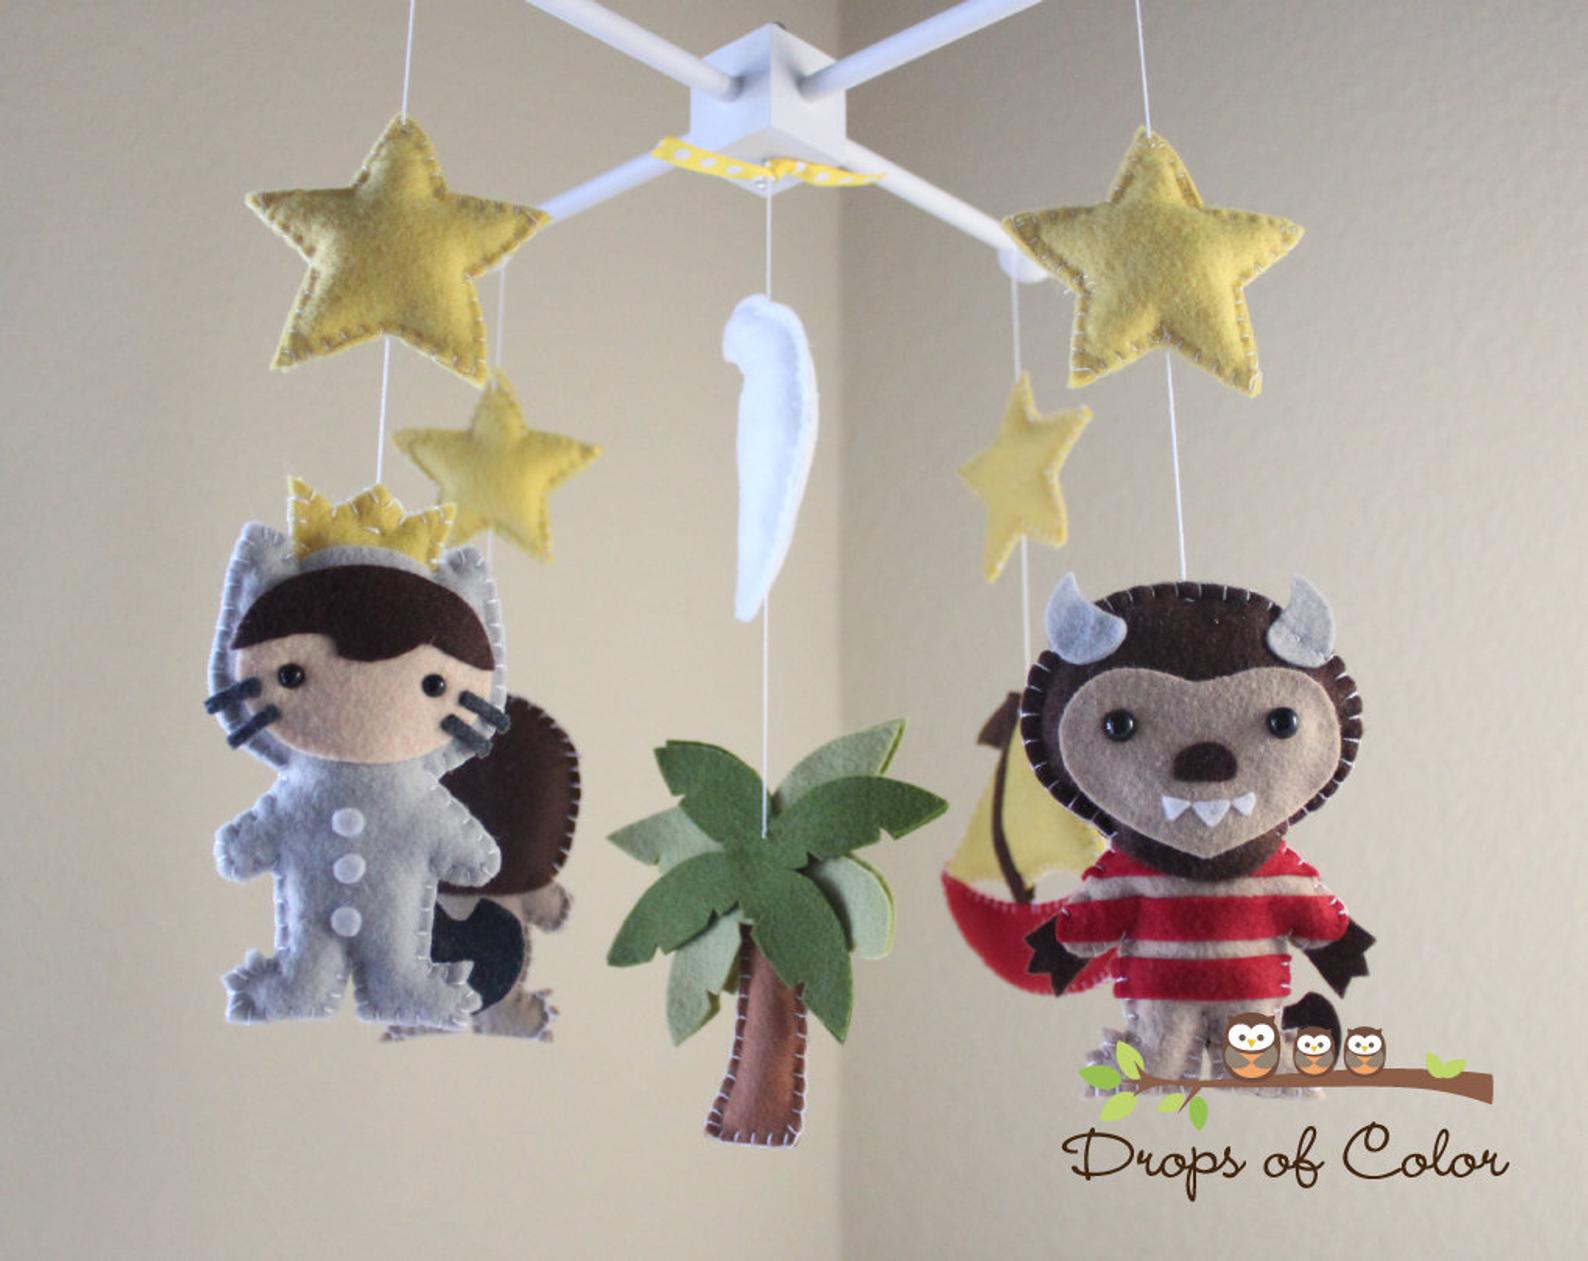 Monsters Mobile, Baby Crib Mobile, Nursery Decor Inspired by Where the Wild Things Are